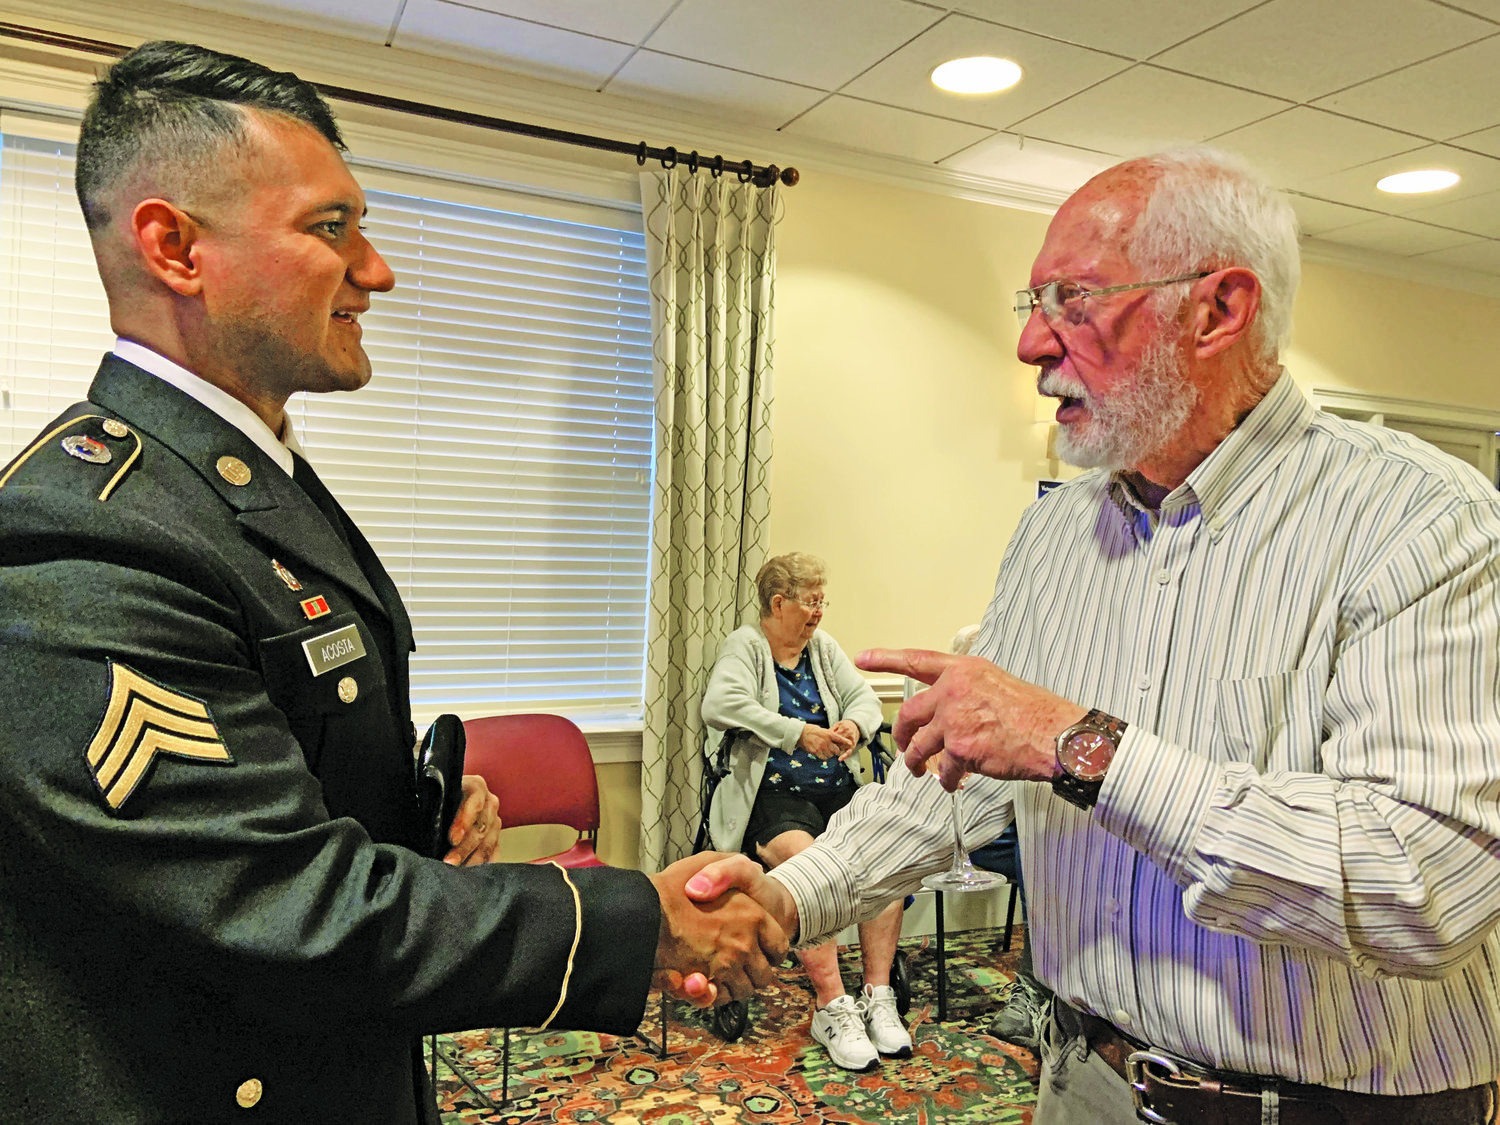 Resident of The Manor at York Town Hank DiPasquale and U.S. Army Sgt. Allen Acosta.